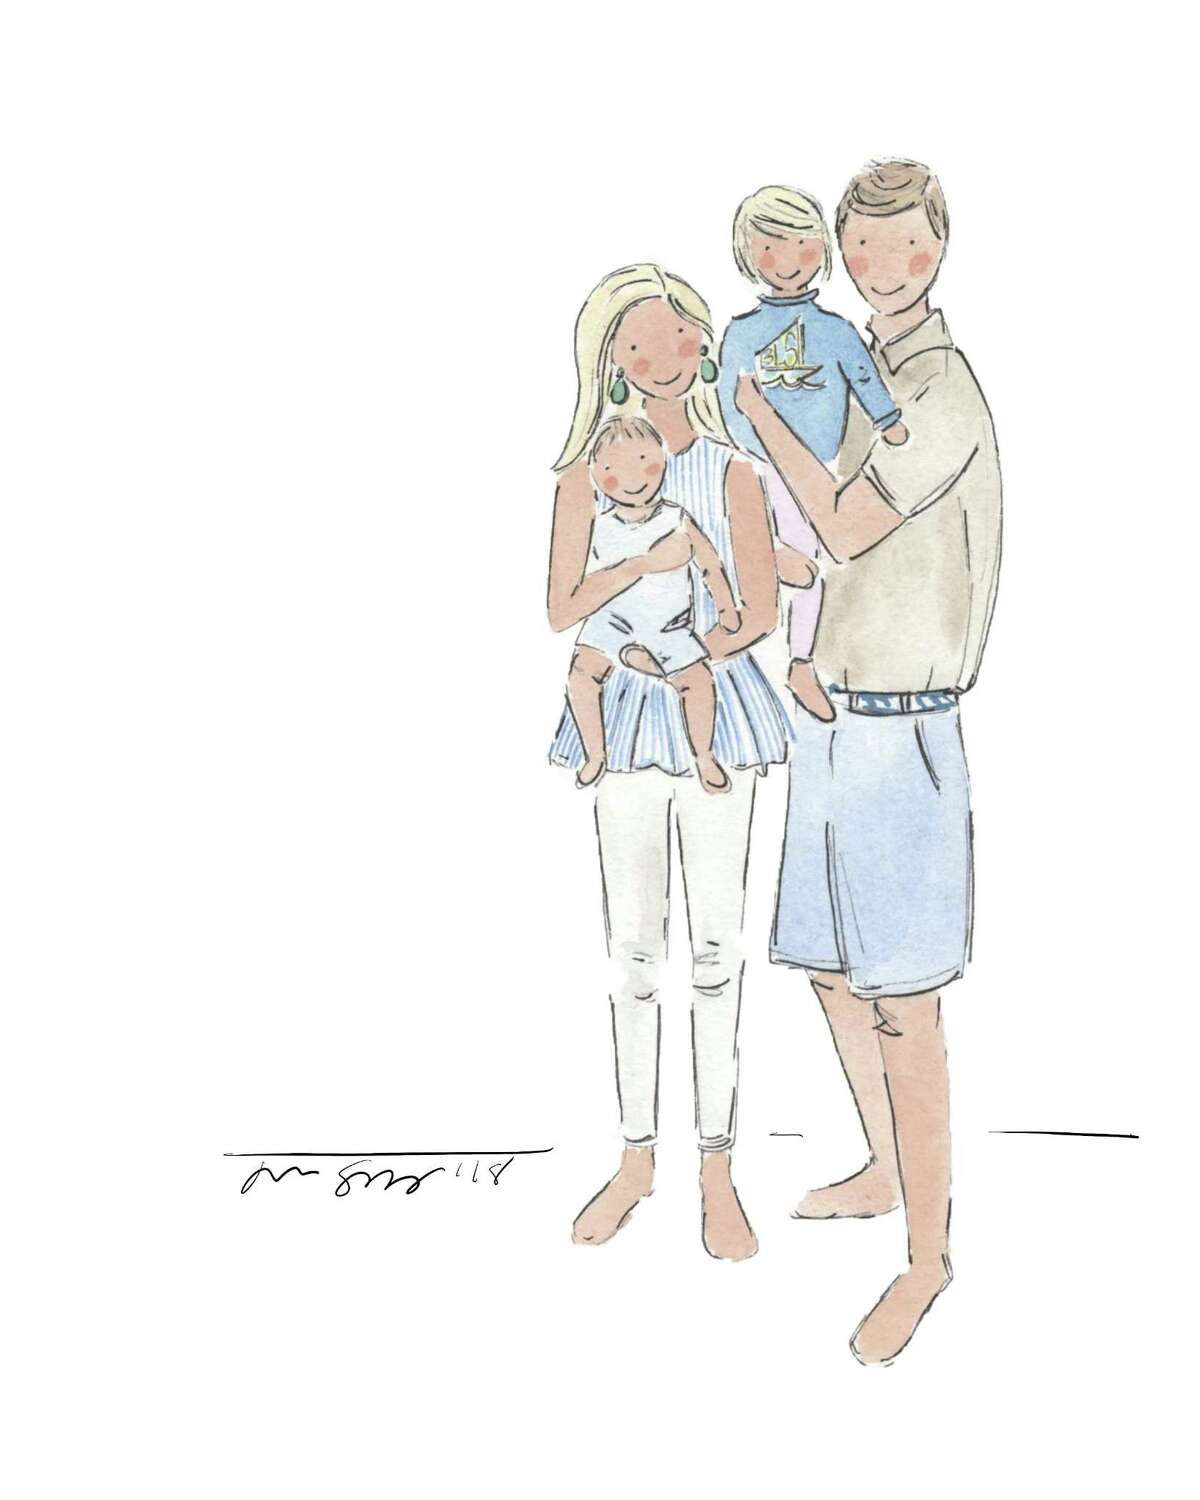 Artist Jen Scully’s watercolor portraits capture the joy of family.